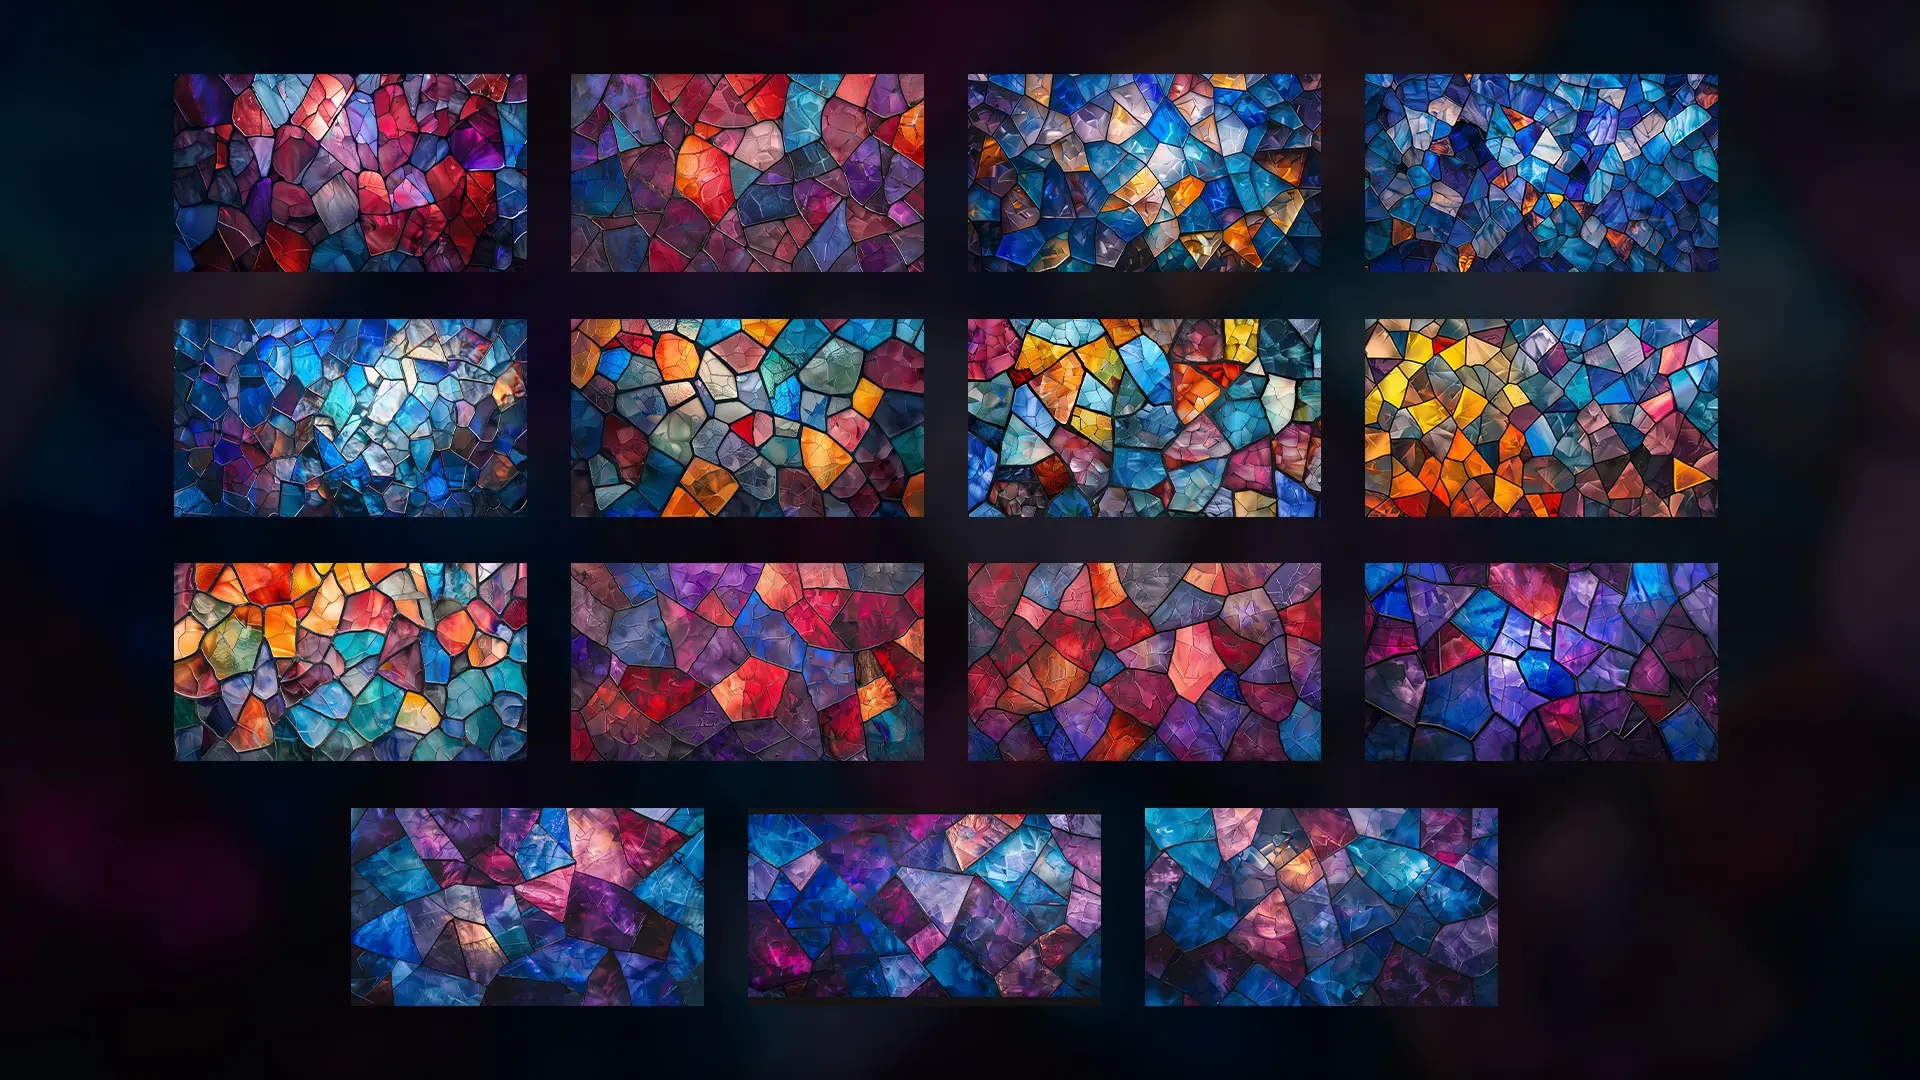 Enhance Your Church'S Visual Experience With Our &Quot;Stained Glass&Quot; Background Collection, Featuring 15 Abstract Pngs That Will Add Vibrant Color And Inspiration To Your Worship Environment.